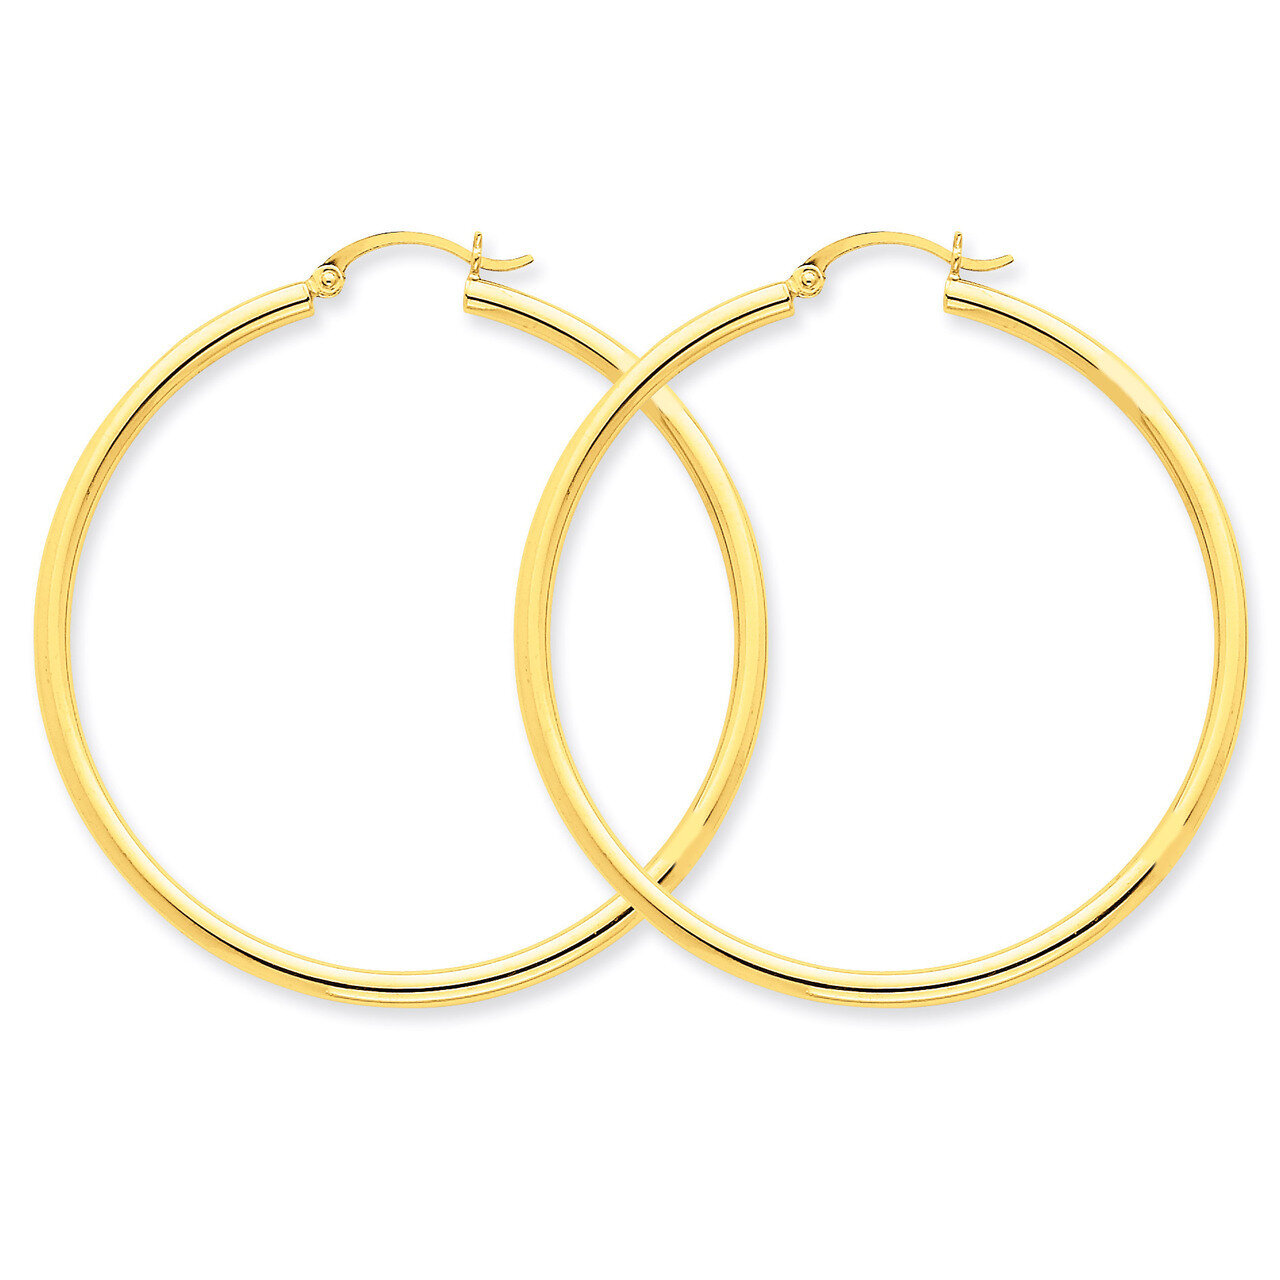 Polished 2.5mm Round Hoop Earrings 10k Gold 10T927